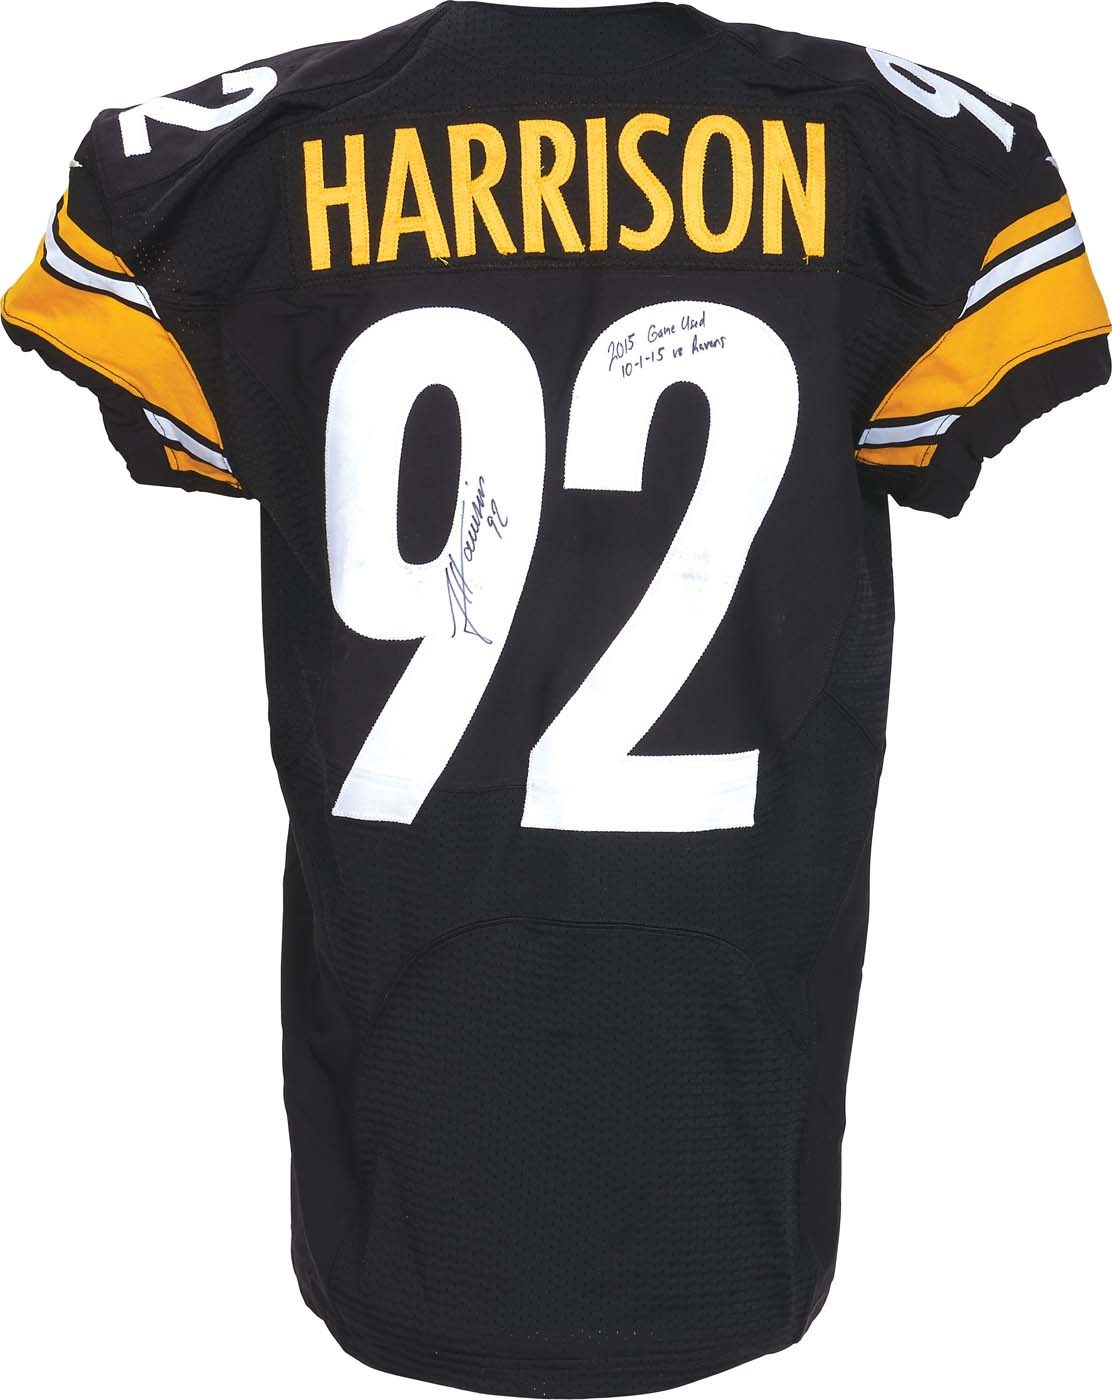 October 1, 2015 James Harrison Pittsburgh Steelers Game Worn Jersey, Cleats and Gloves